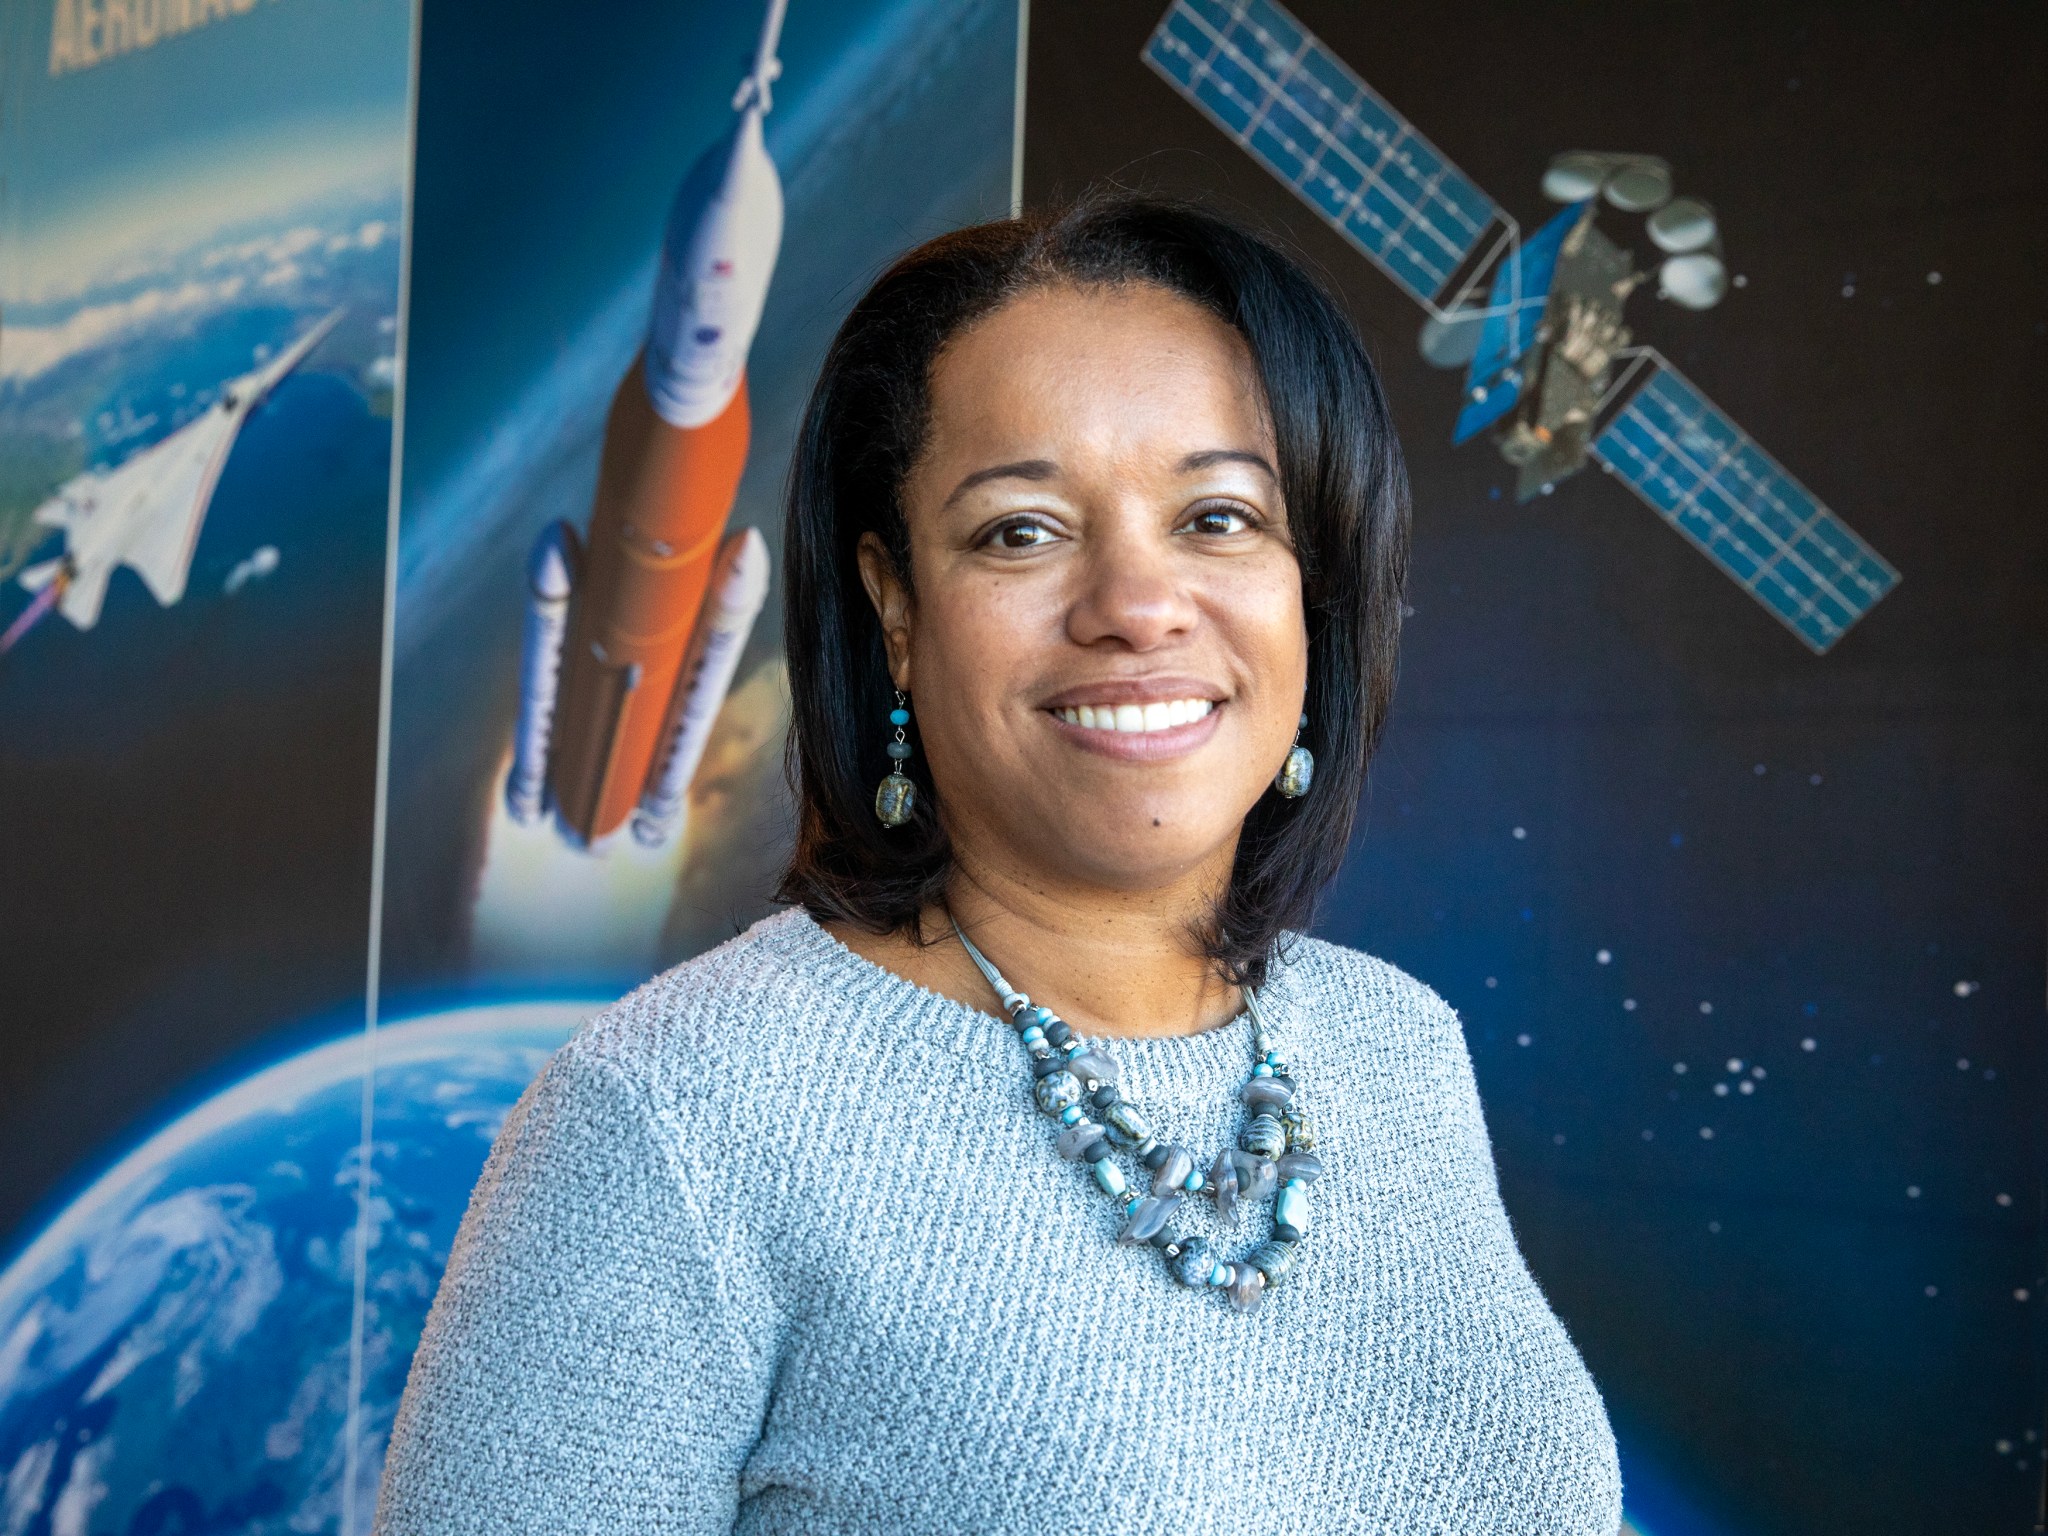 Dr. Kanama Bivins is Acting Associate Director at NASA Langley Research Center. She is pictured here smiling and wearing a grey sweater and necklace. She is standing in front of a poster featuring imagery from NASA missions, including Artemis and